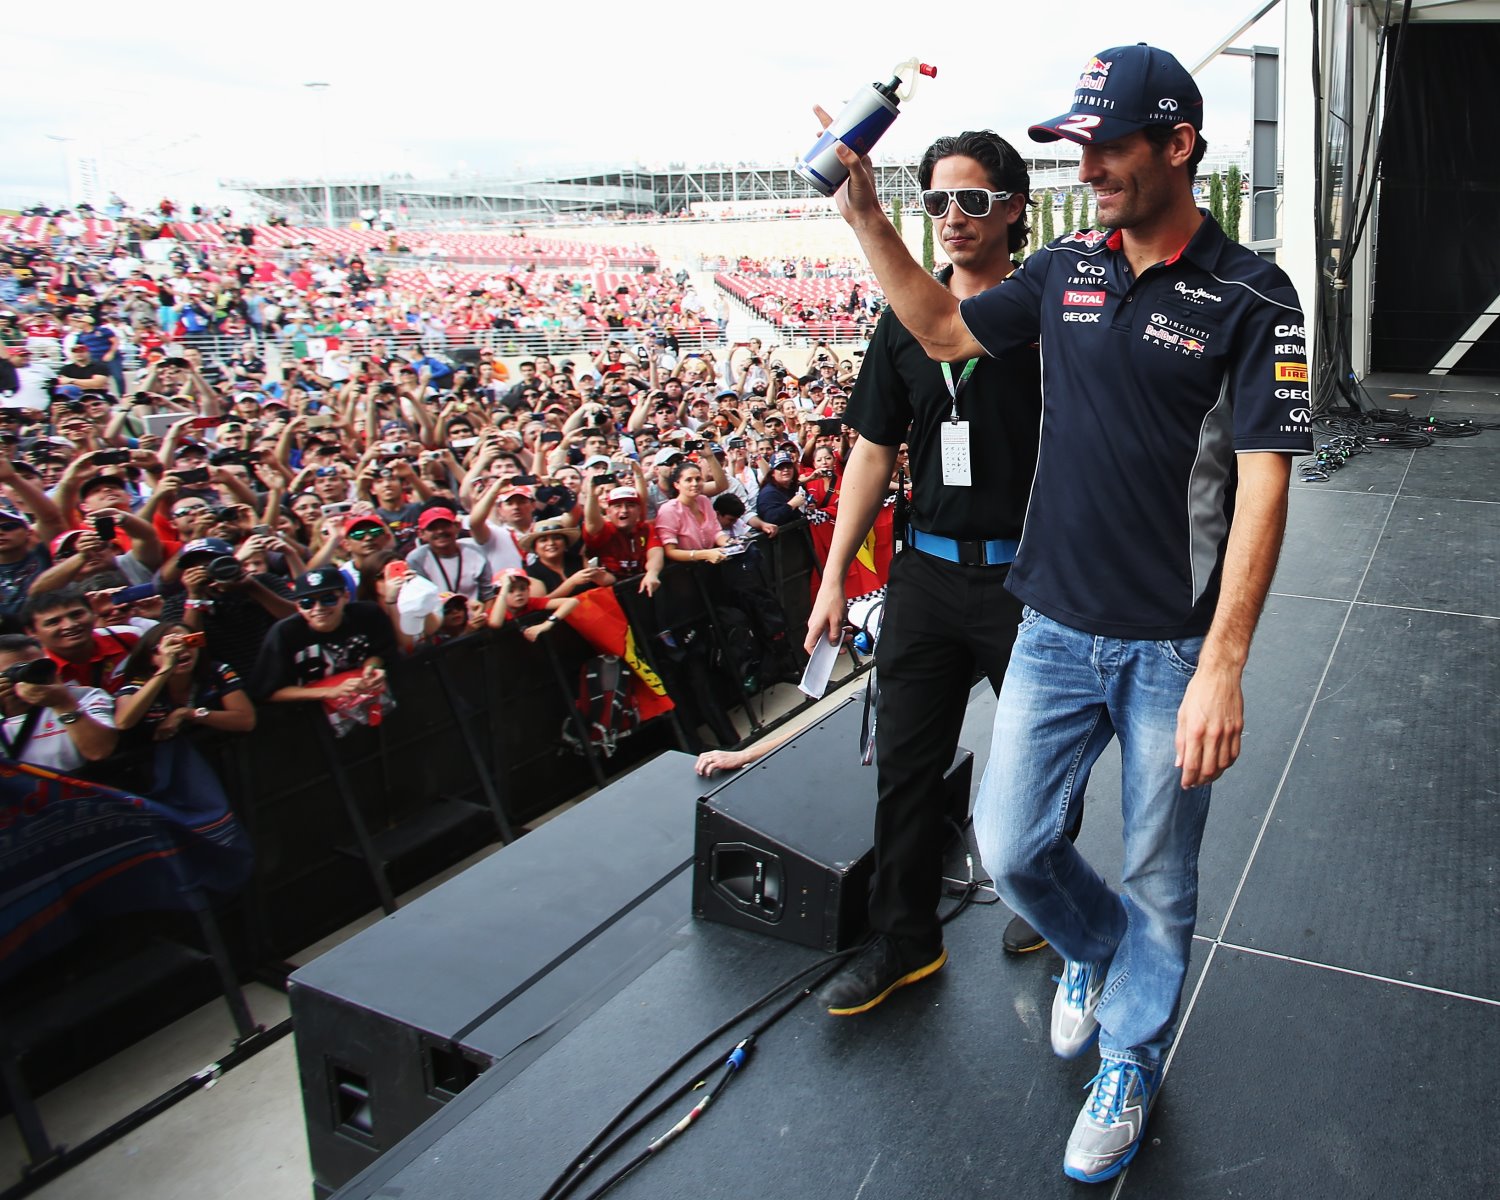 Liberty wants to give fans access to the sacred F1 paddock